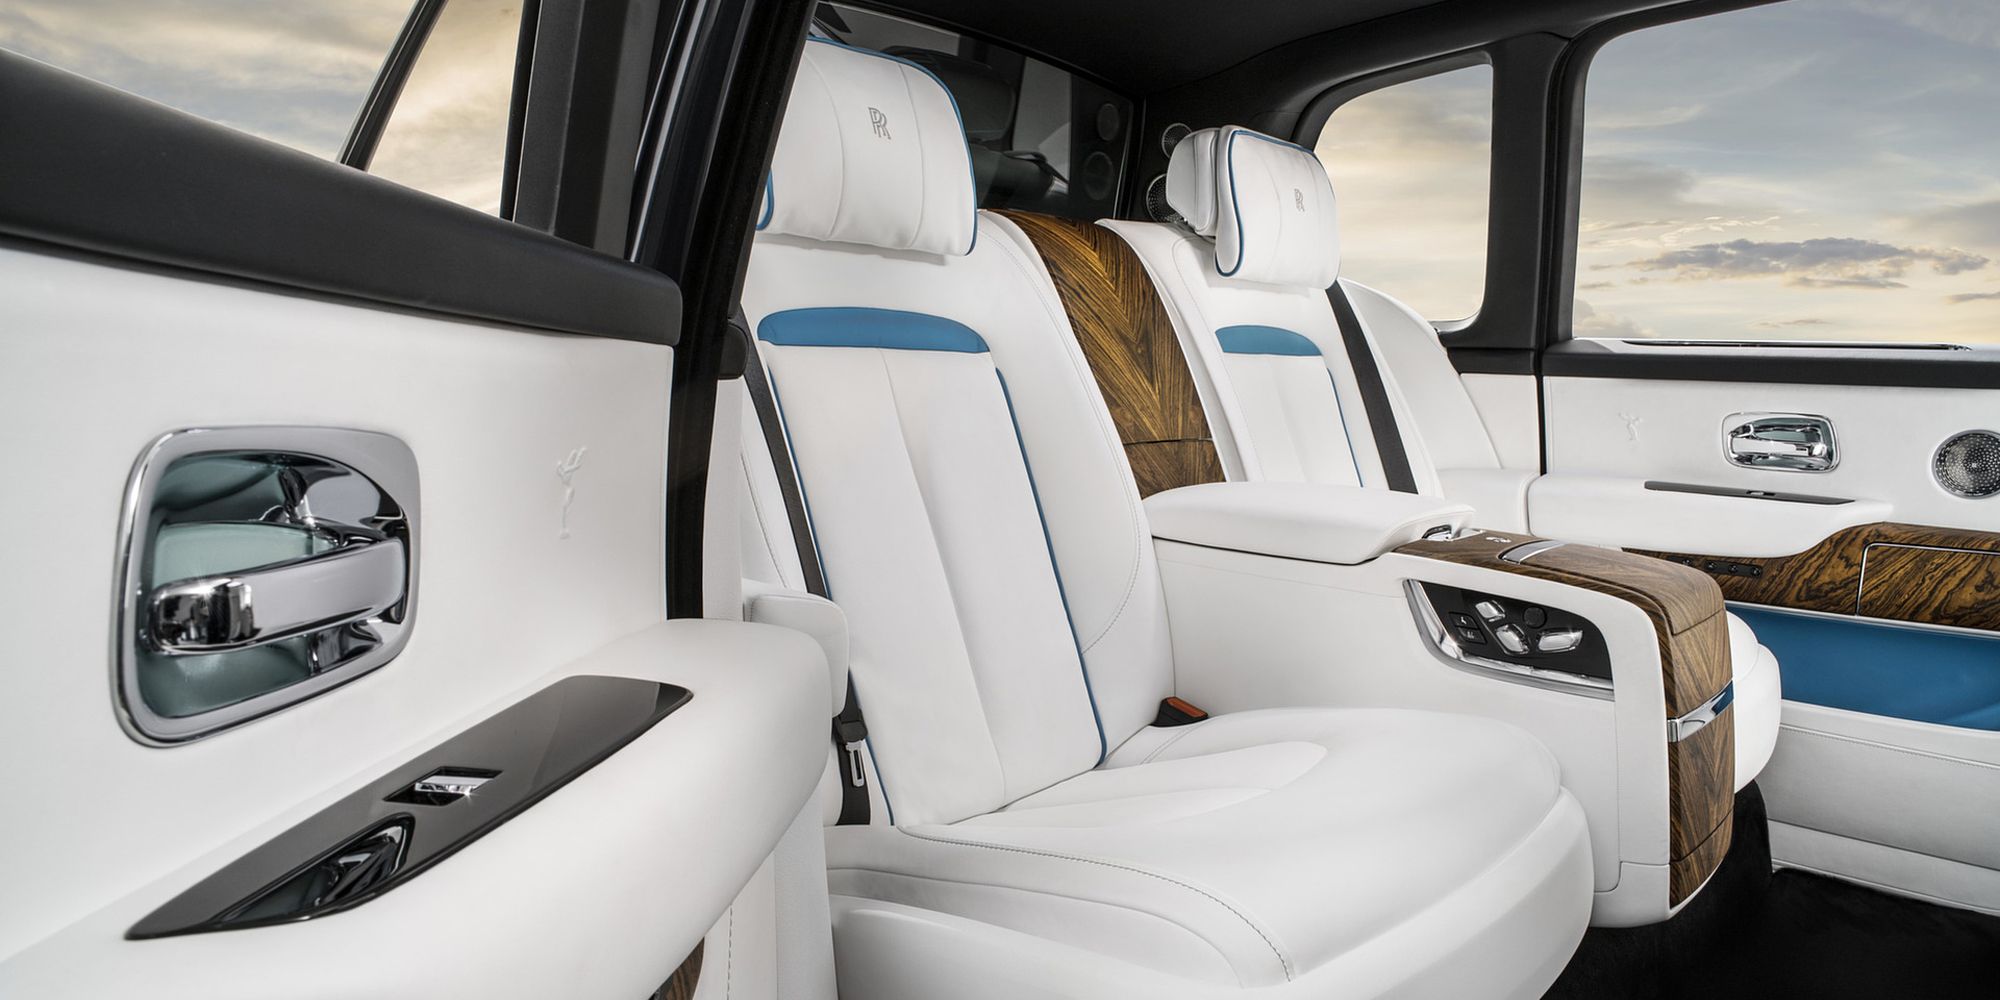 The rear seats in the Cullinan